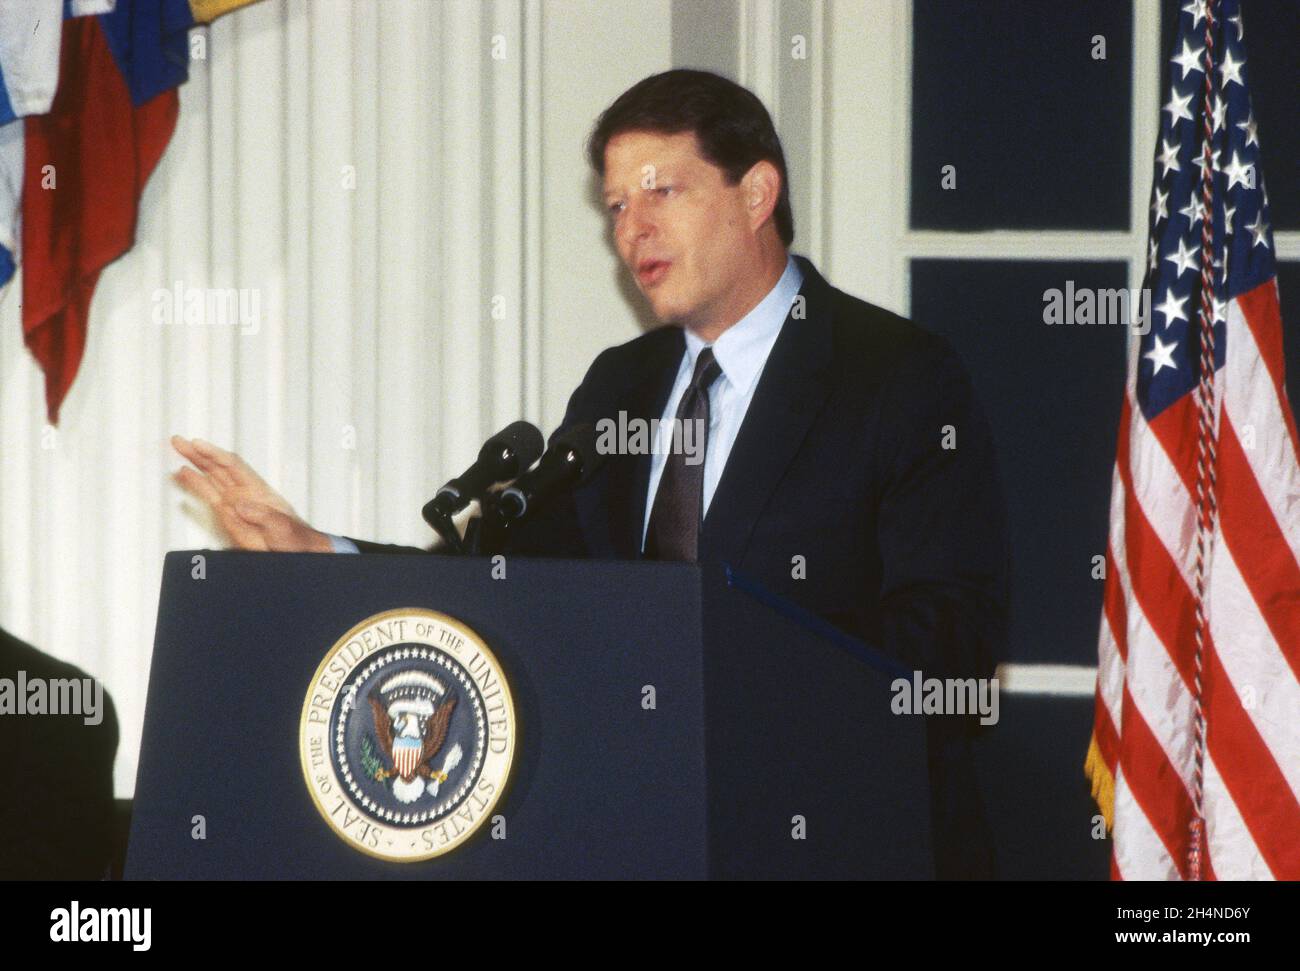 United States Vice President Al Gore makes remarks prior to introducing US President Bill Clinton prior to the signing of the multinational GATT Treaty at the Organization of American States Building in Washington, DC on Thursday, December 8, 1994.Credit: Ron Sachs / CNP / MediaPunch Stock Photo